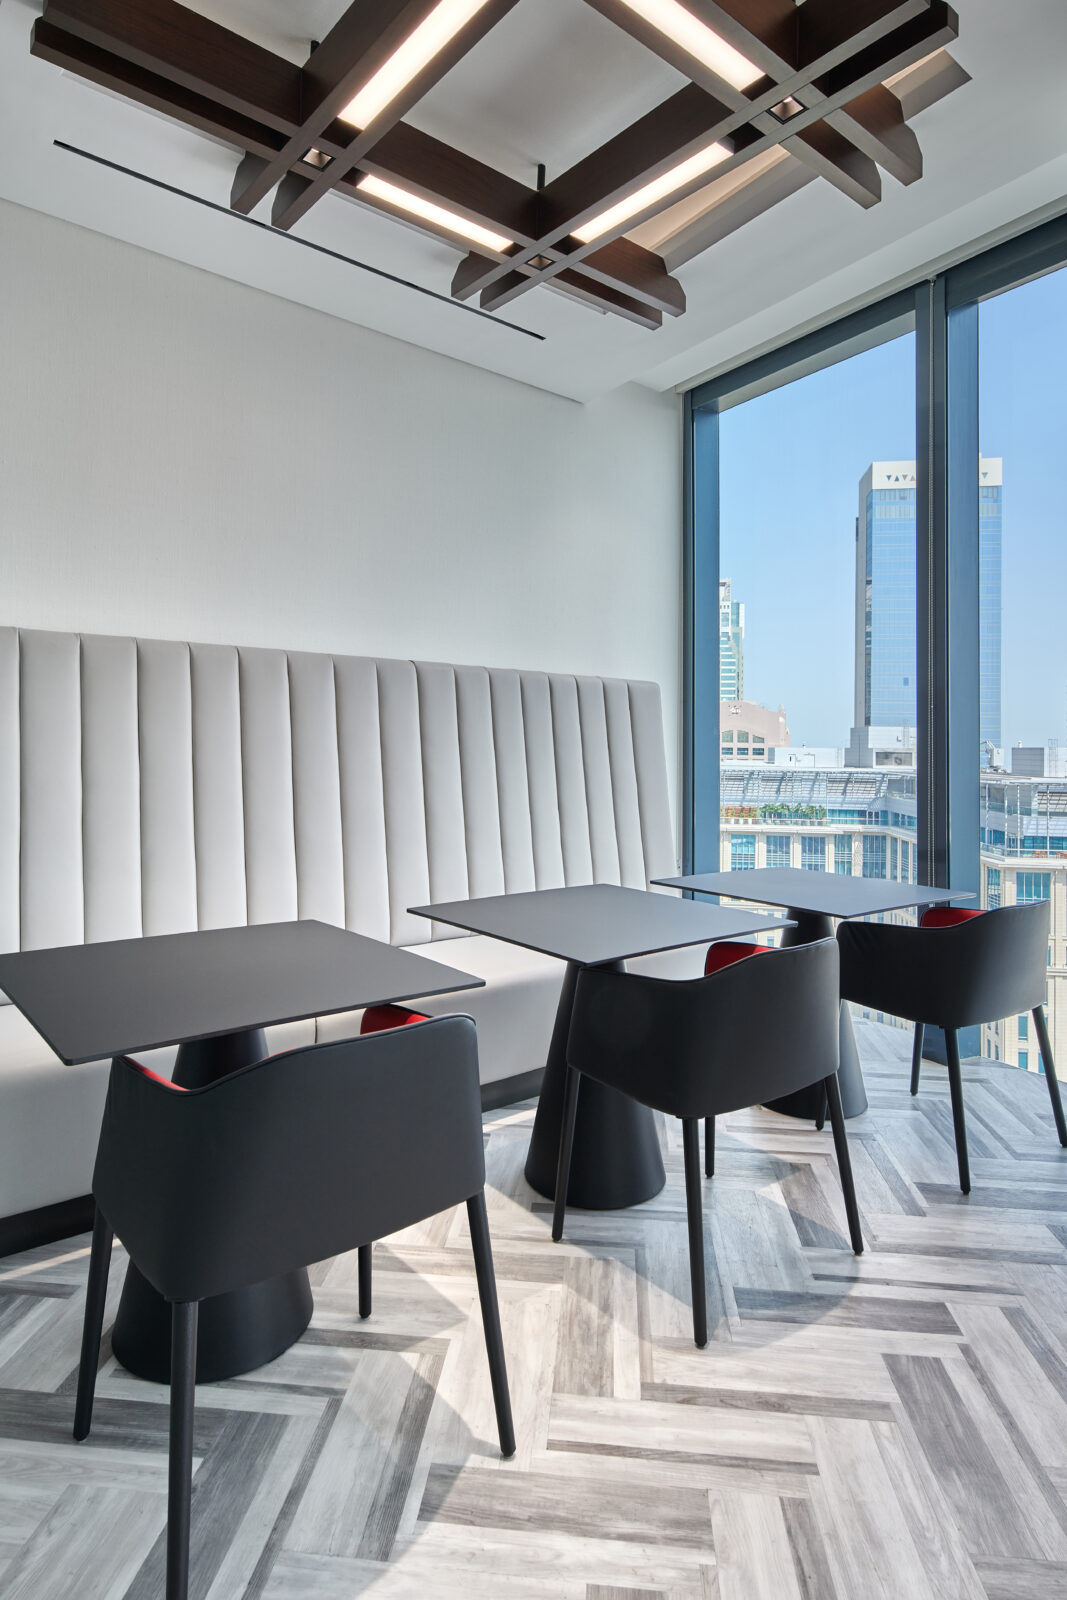 Architectural Lighting Scheme Norton Rose Fulbright Commercial Office Cafe Space Dubai Consultants Studio N